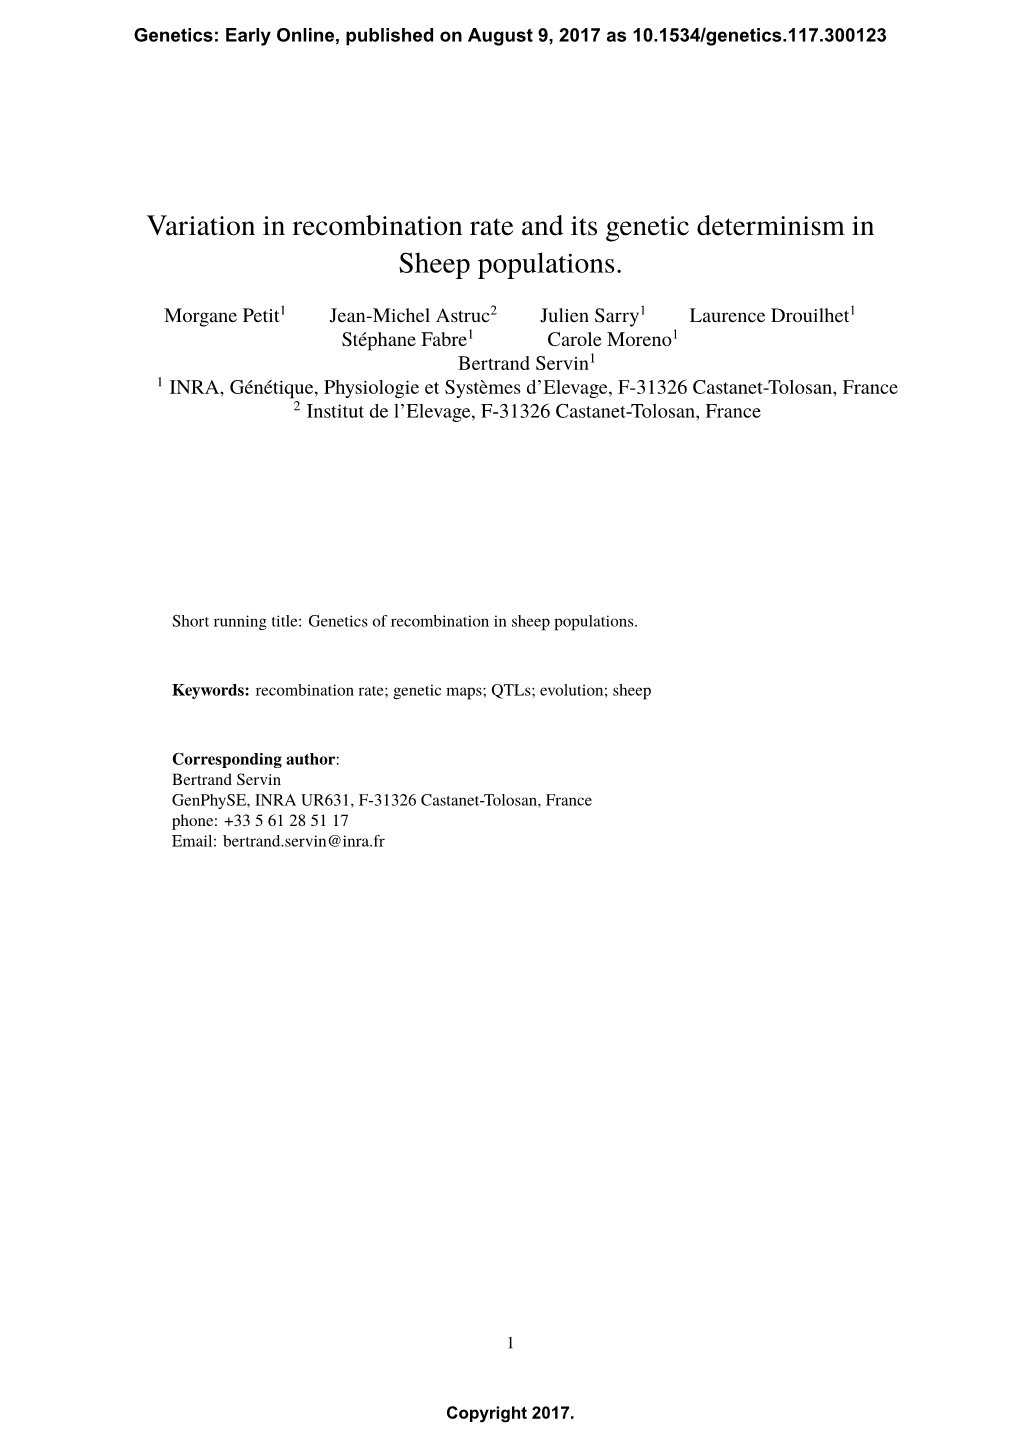 Variation in Recombination Rate and Its Genetic Determinism in Sheep Populations